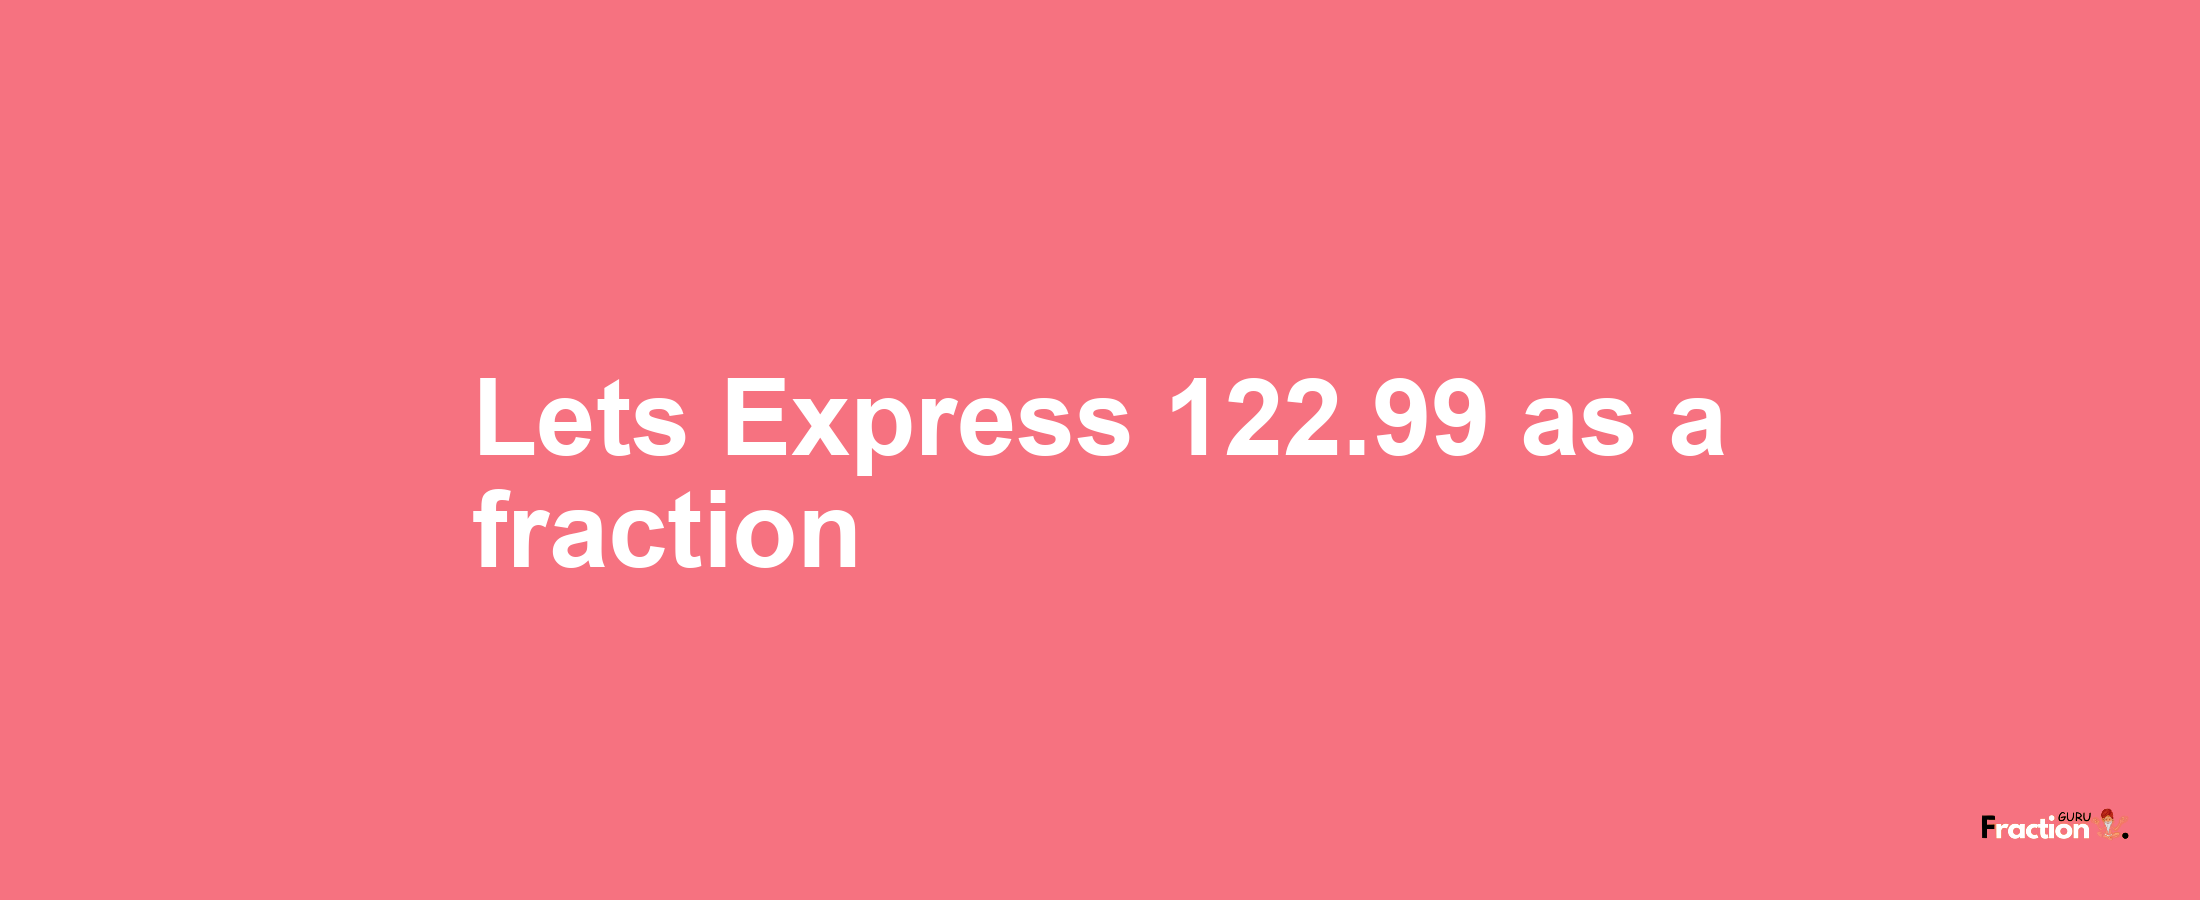 Lets Express 122.99 as afraction